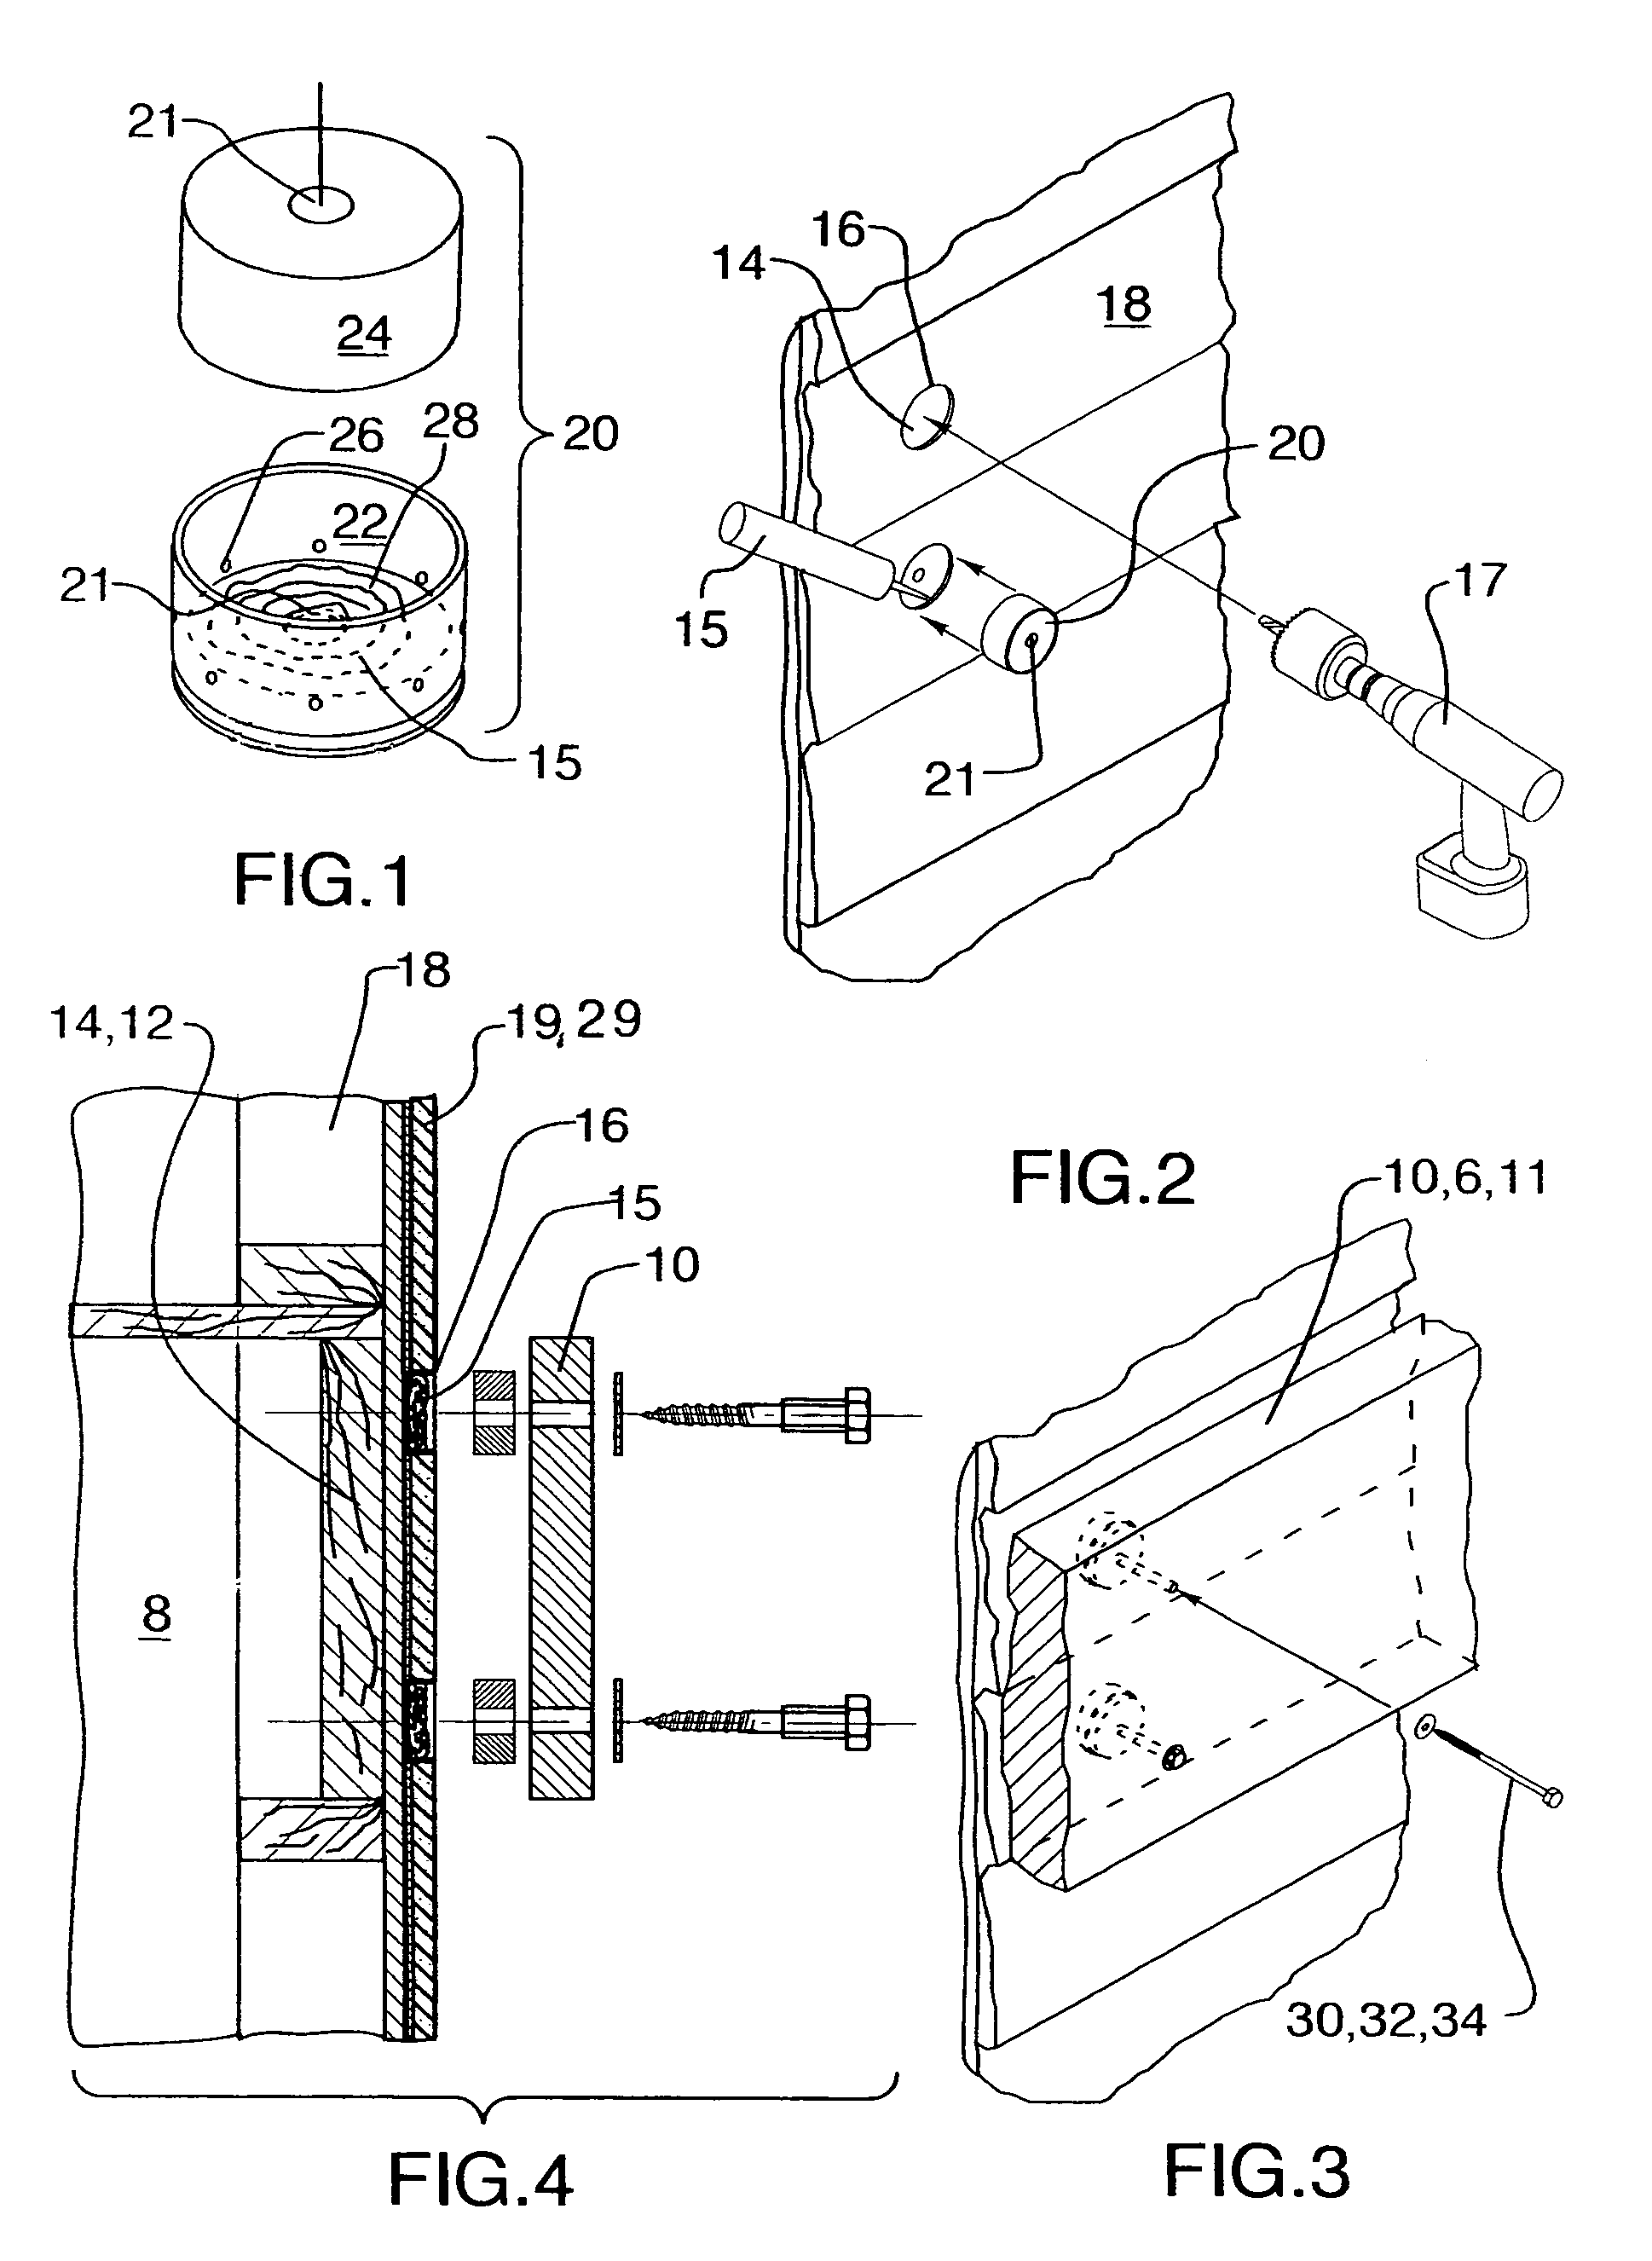 Method and apparatus for attaching a supported addition to a finished building